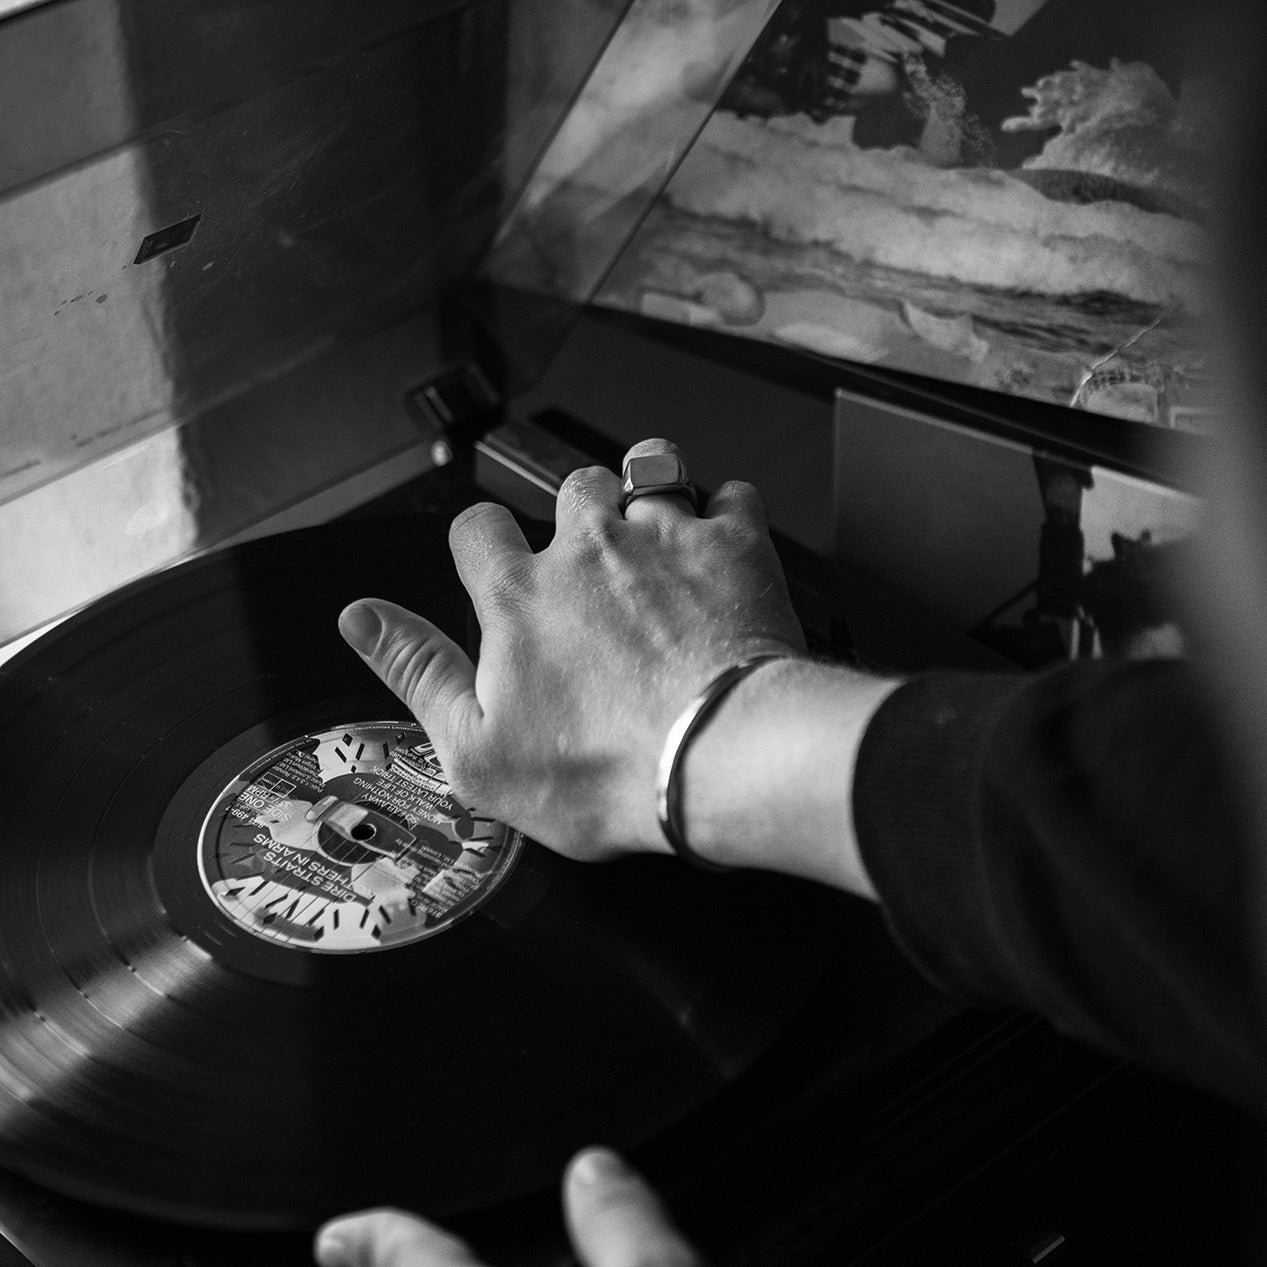 Hand and arm reaching for a record player while wearing a titanium ring and bracelet.